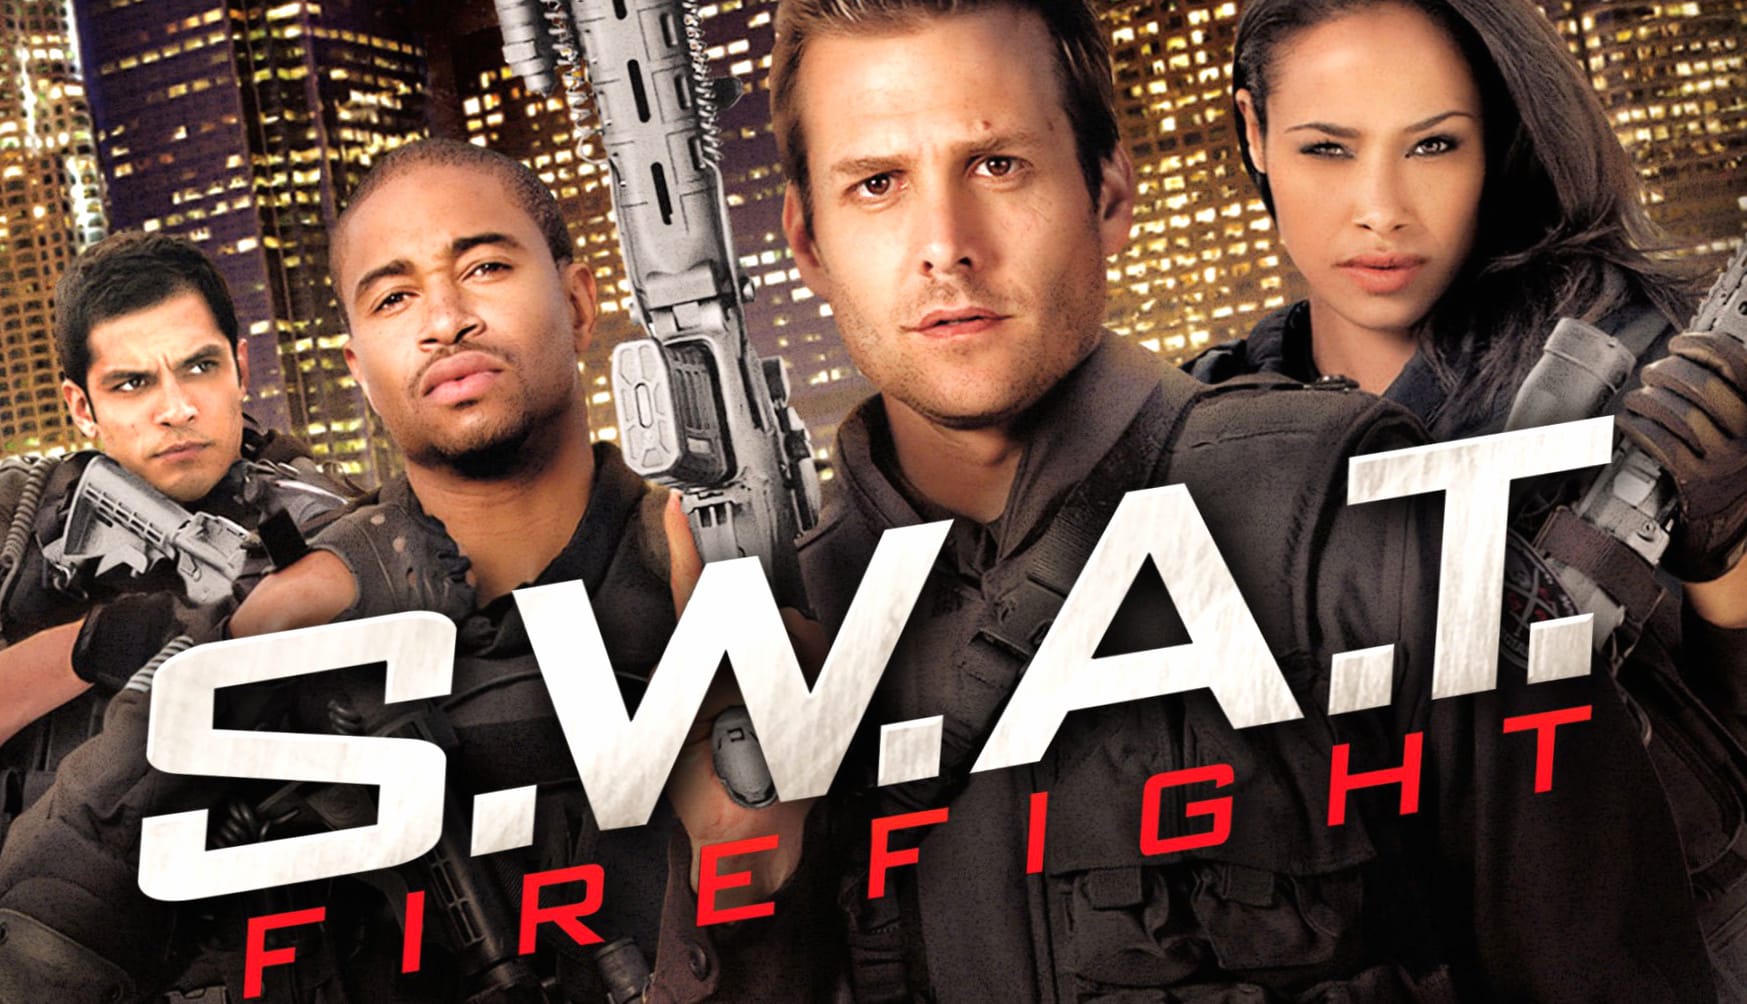 S.W.A.T. Firefight wallpapers HD quality